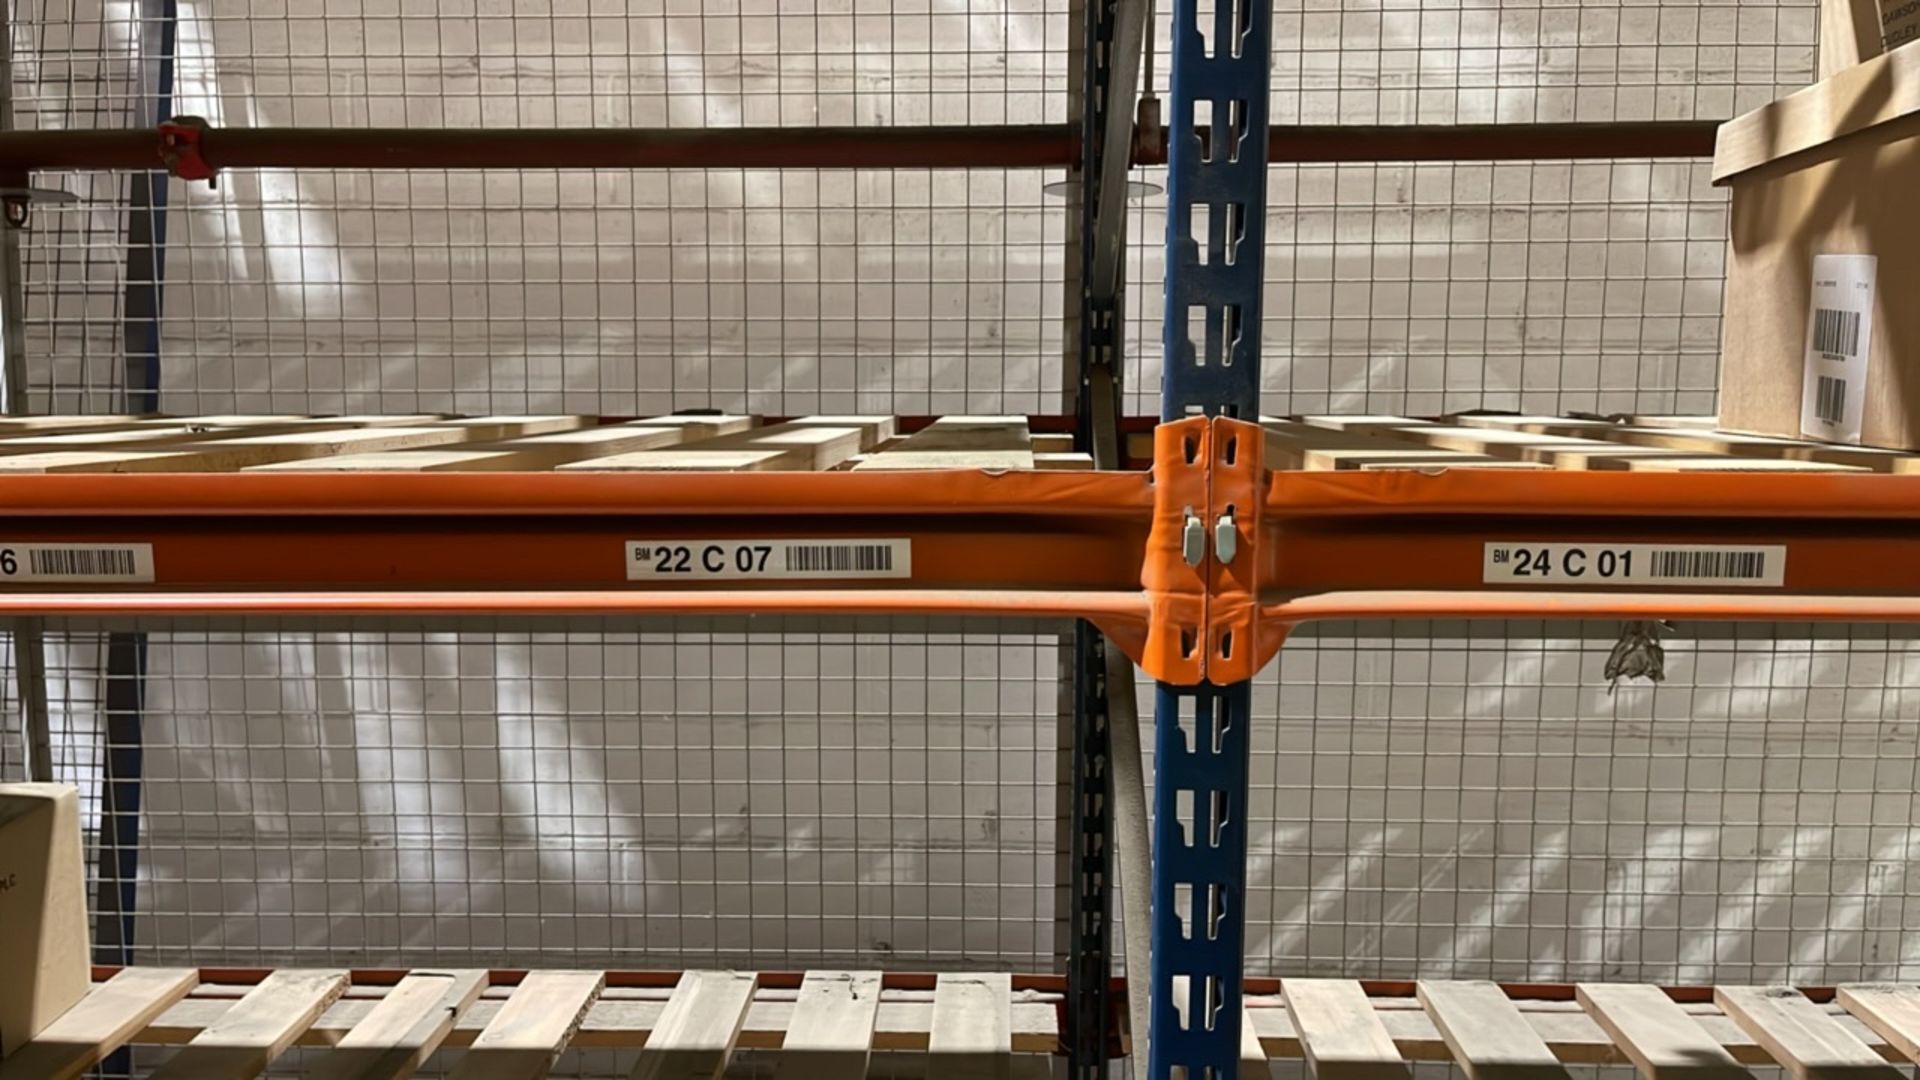 Run of 12 Bays Of Boltless Industrial Pallet Racking - Image 7 of 11